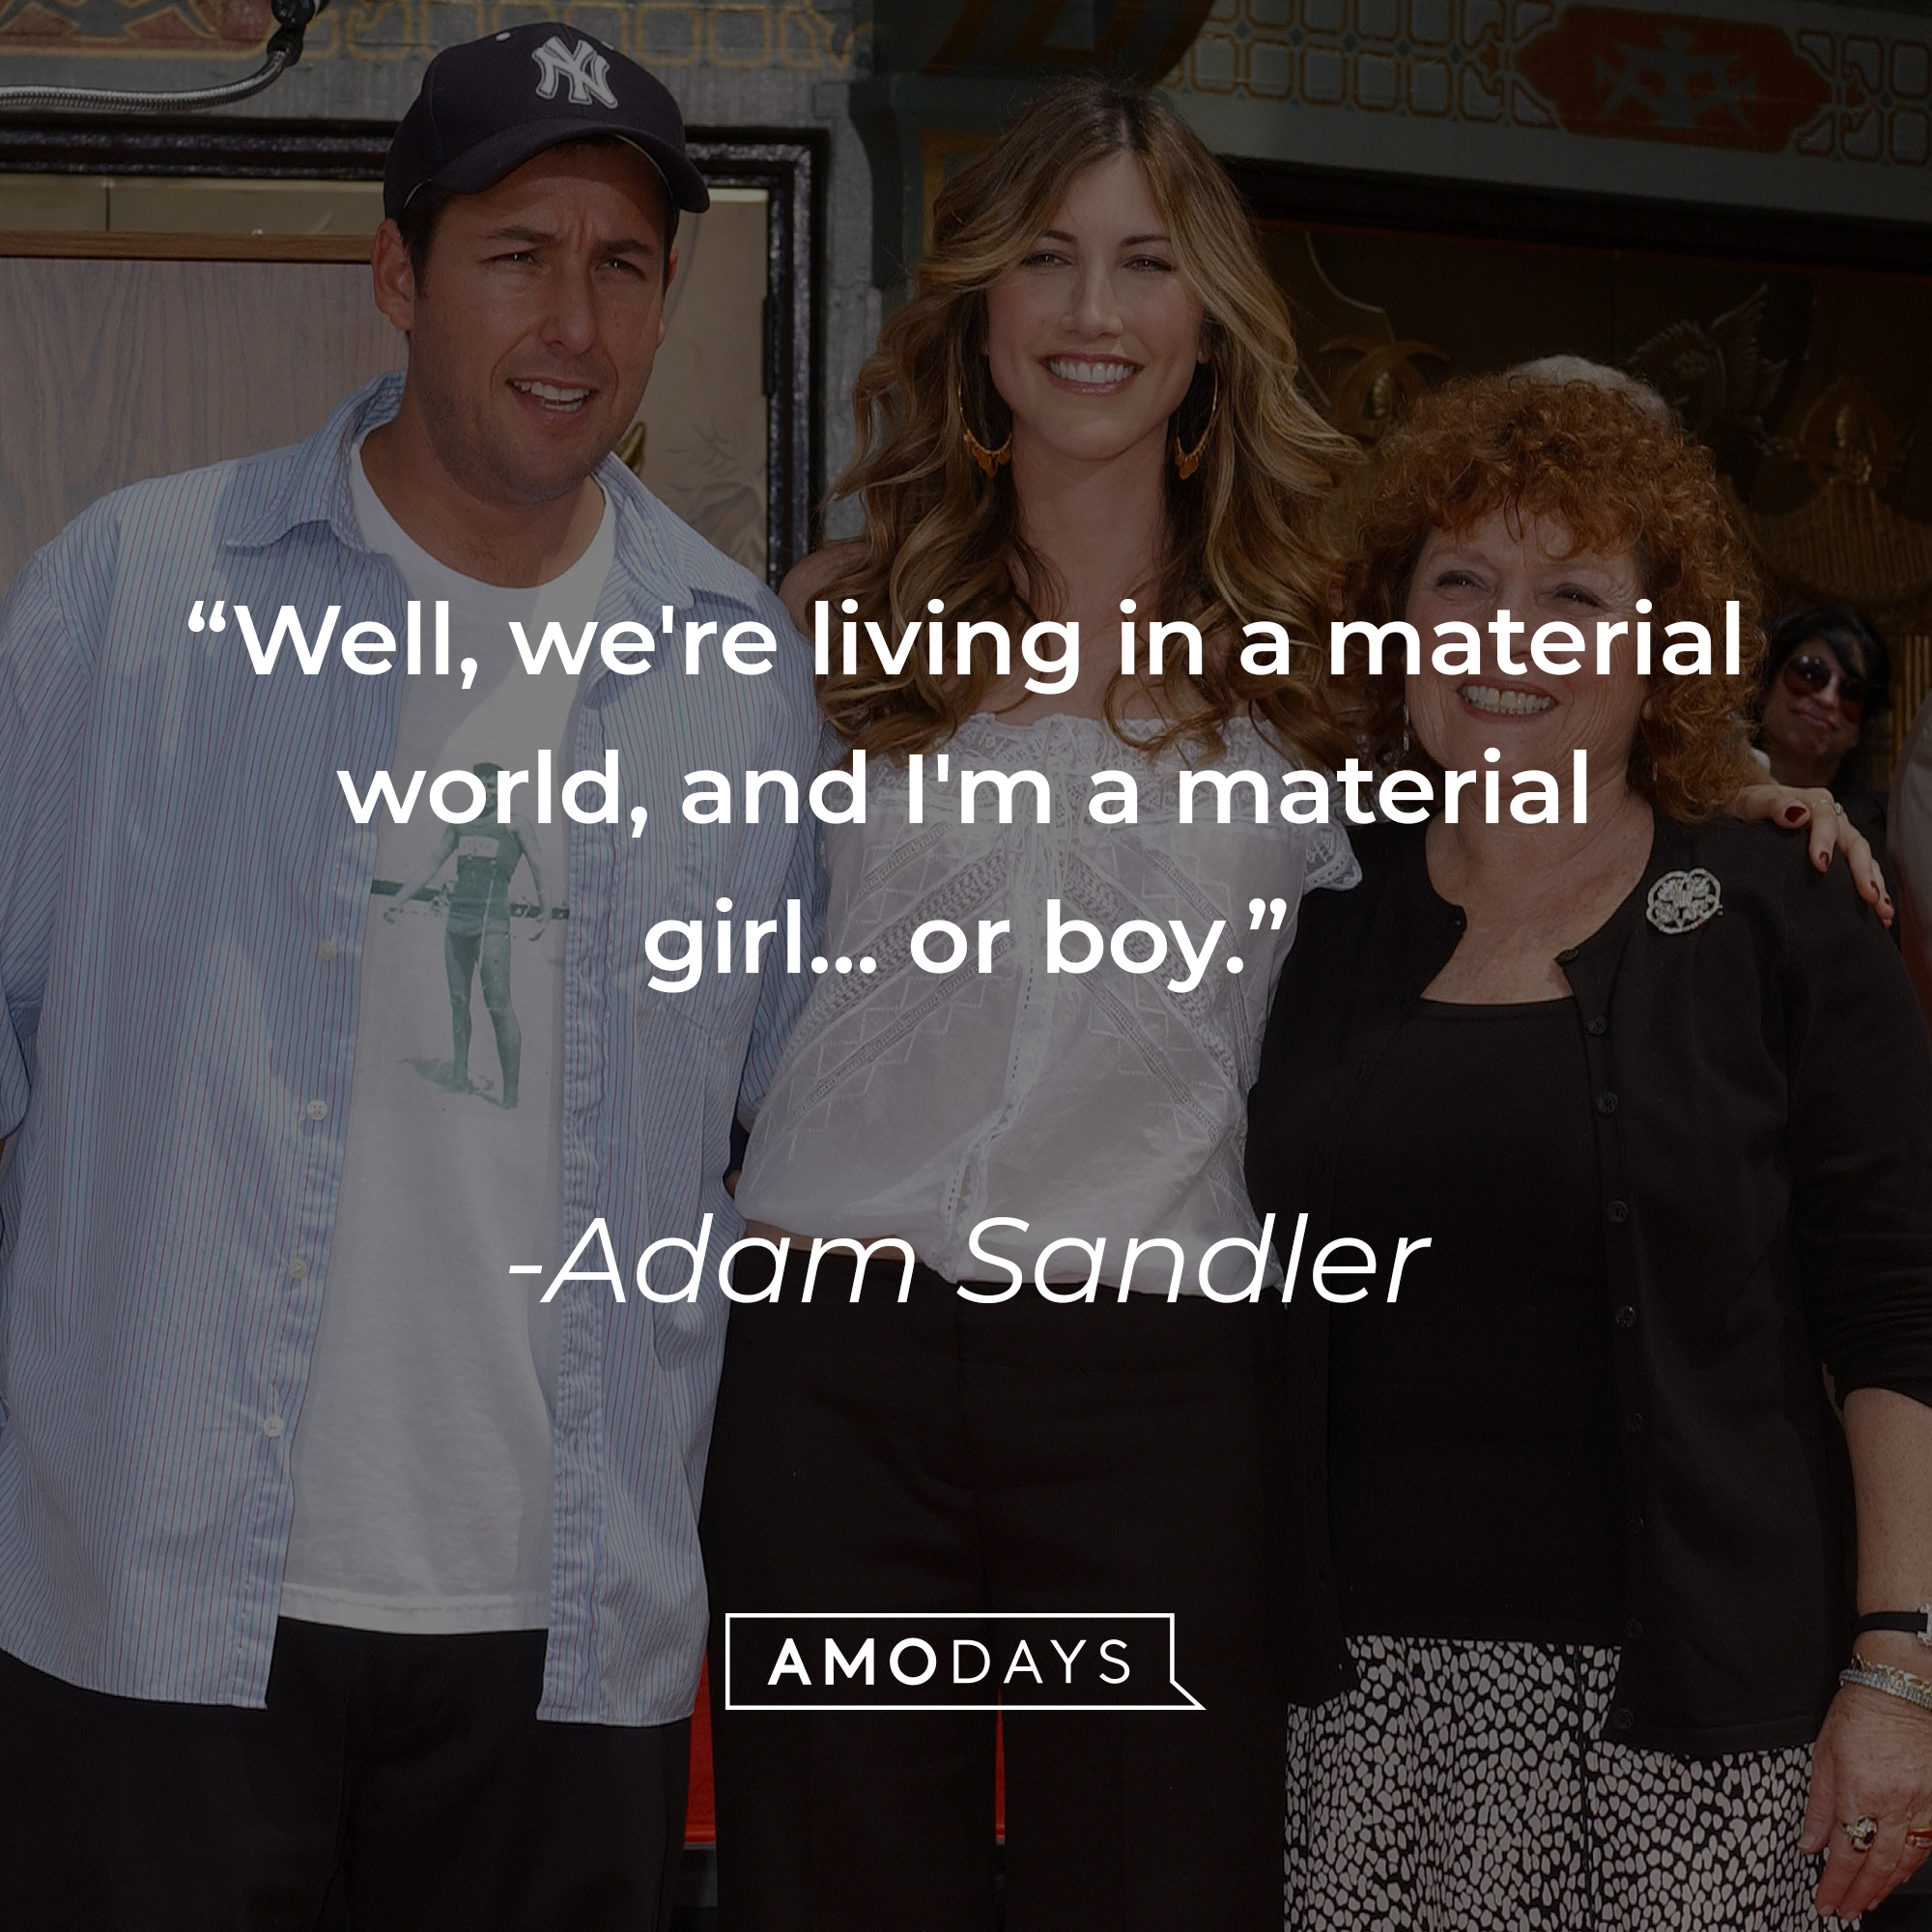 Adam Sandler's quote: "Well, we're living in a material world, and I'm a material girl... or boy." | Source: Getty Images